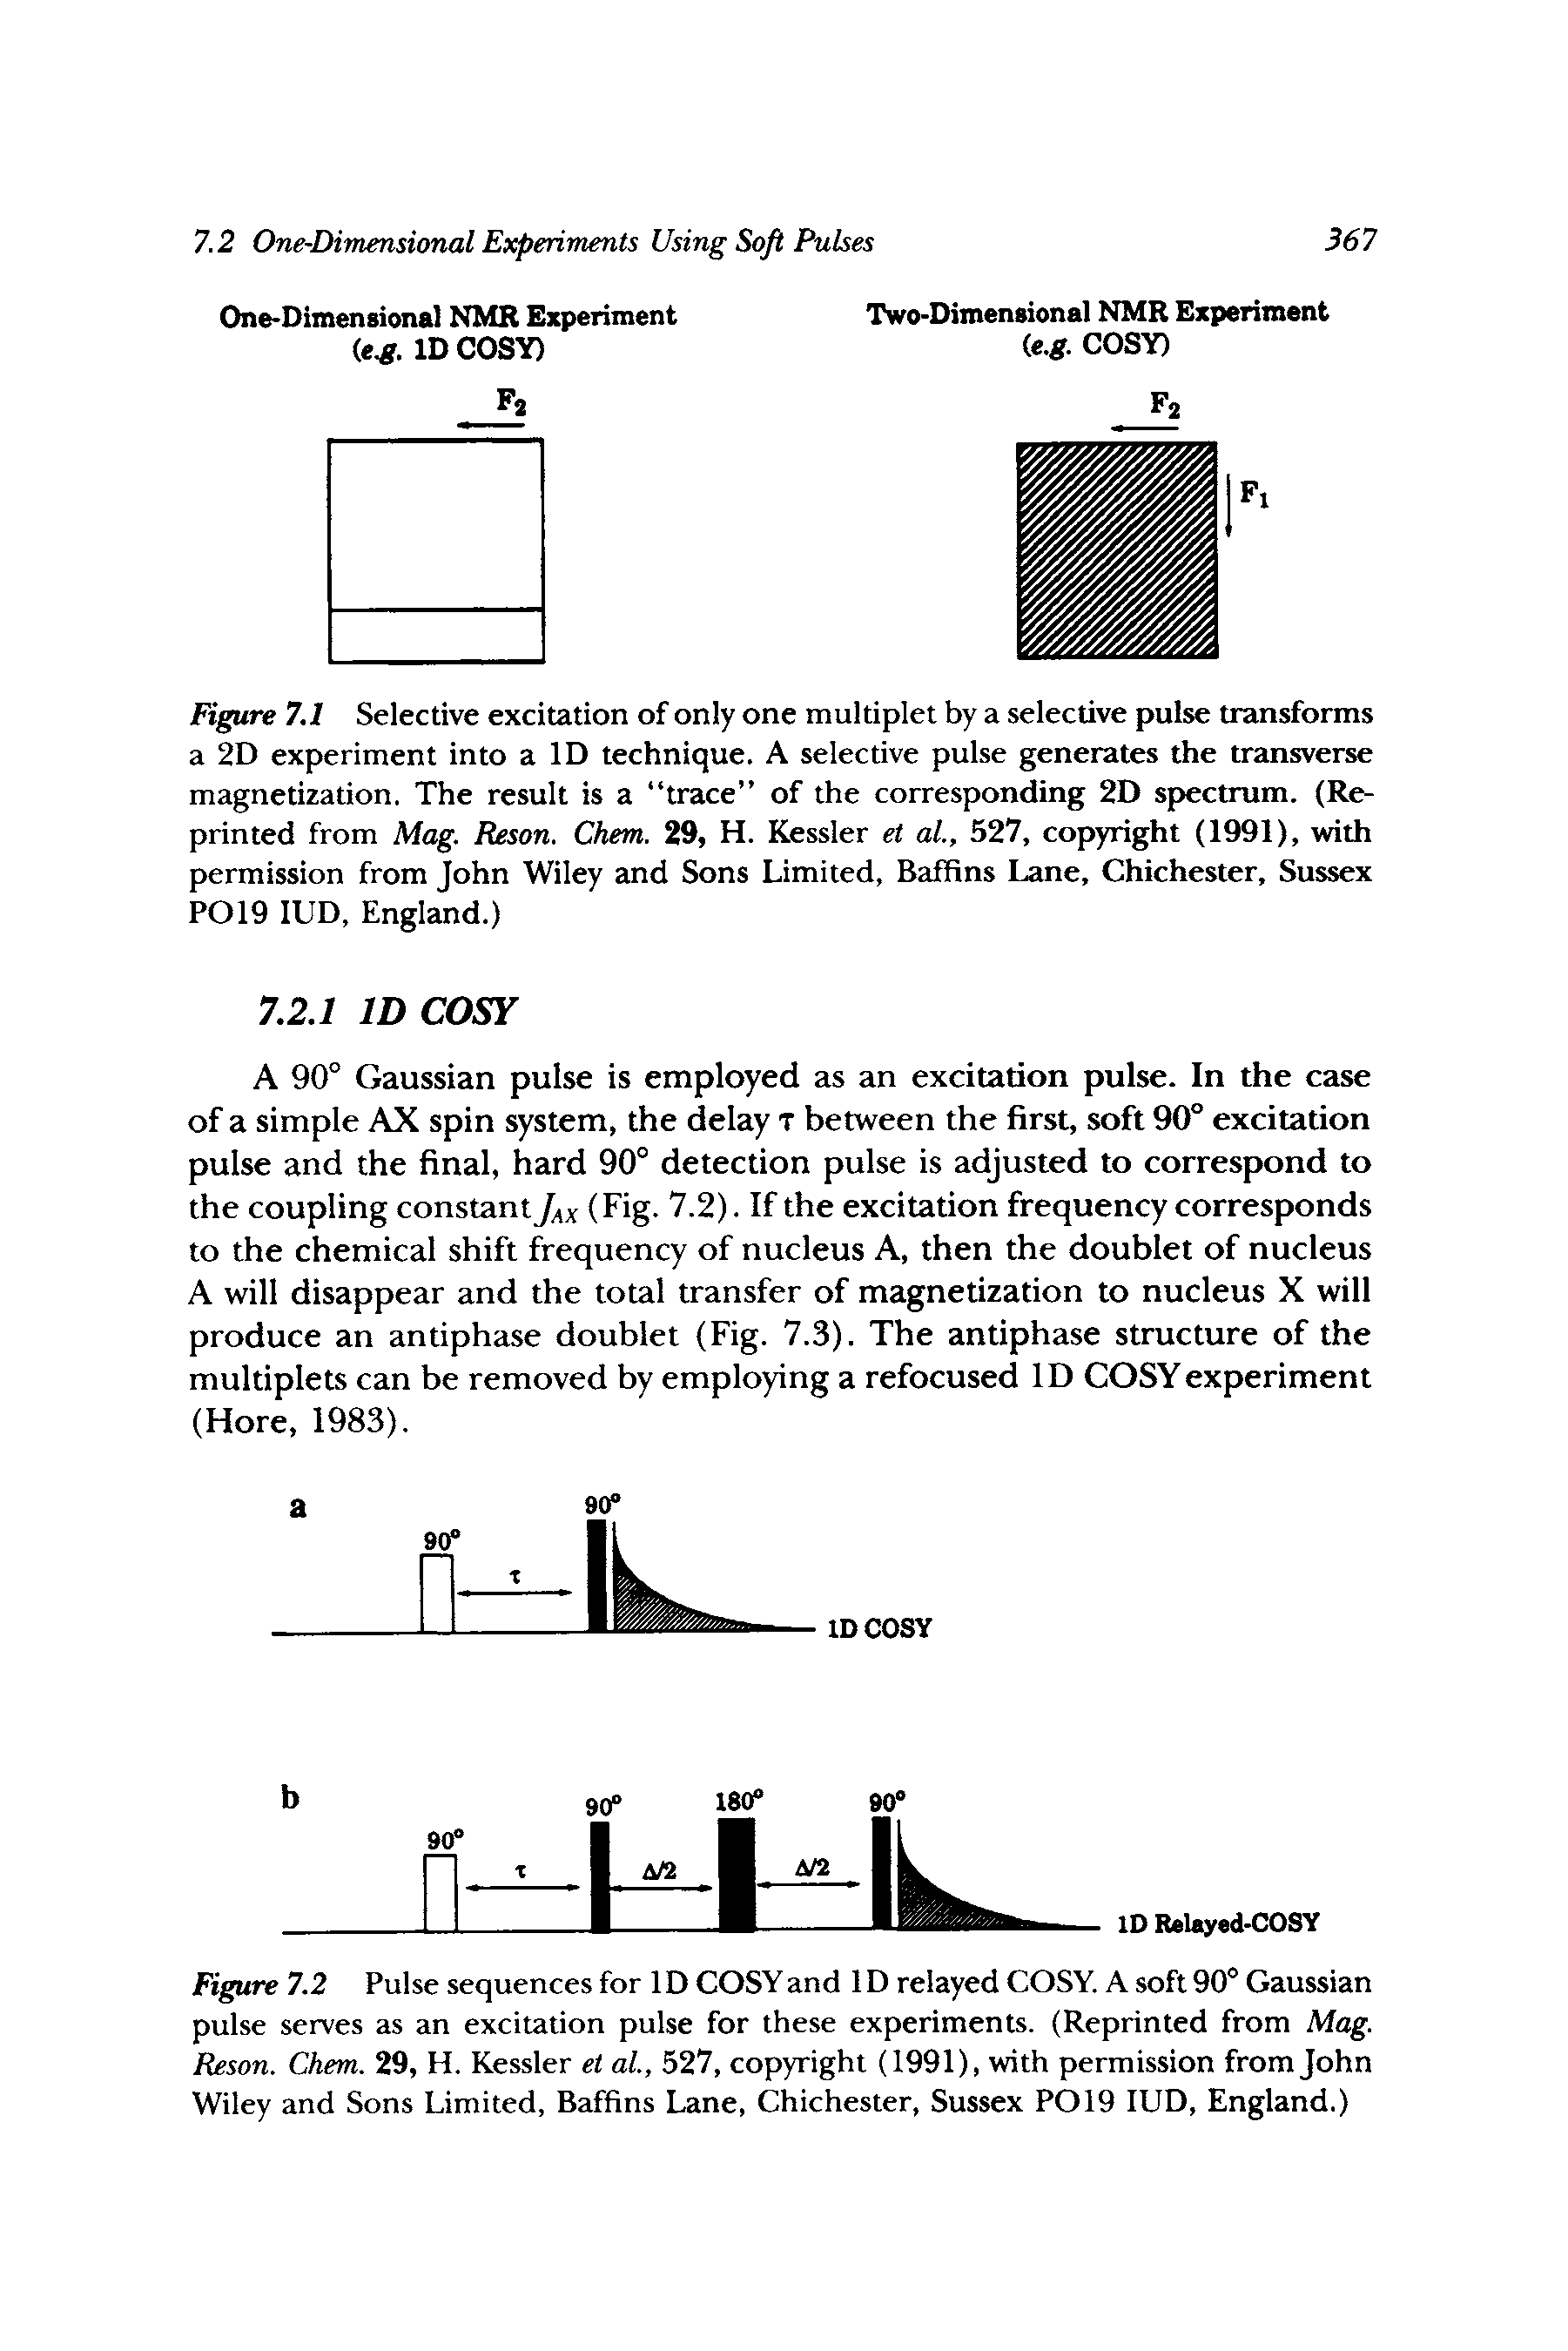 Figure 7.2 Pulse sequences for 1D COSY and 1D relayed COSY. A soft 90° Gaussian pulse serves as an excitation pulse for these experiments. (Reprinted from Mag. Reson. Chem. 29, H. Kessler et al., 527, copyright (1991), with permission from John Wiley and Sons Limited, Baffins Lane, Chichester, Sussex P019 lUD, England.)...